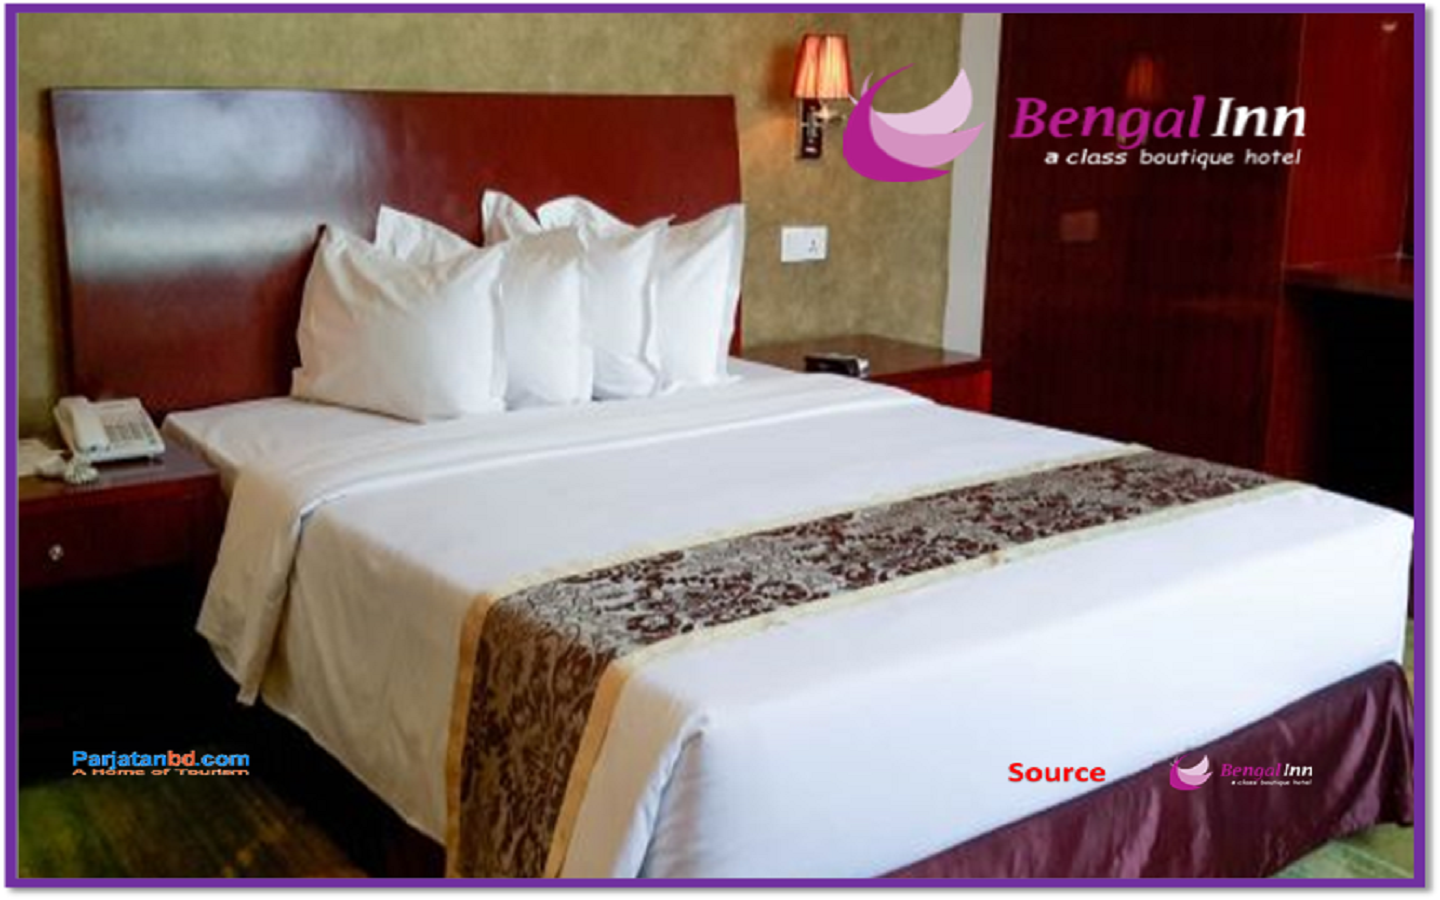 Room Super Deluxe Double -1, Bengal Inn (A Class Boutique Hotel), Gulshan 1